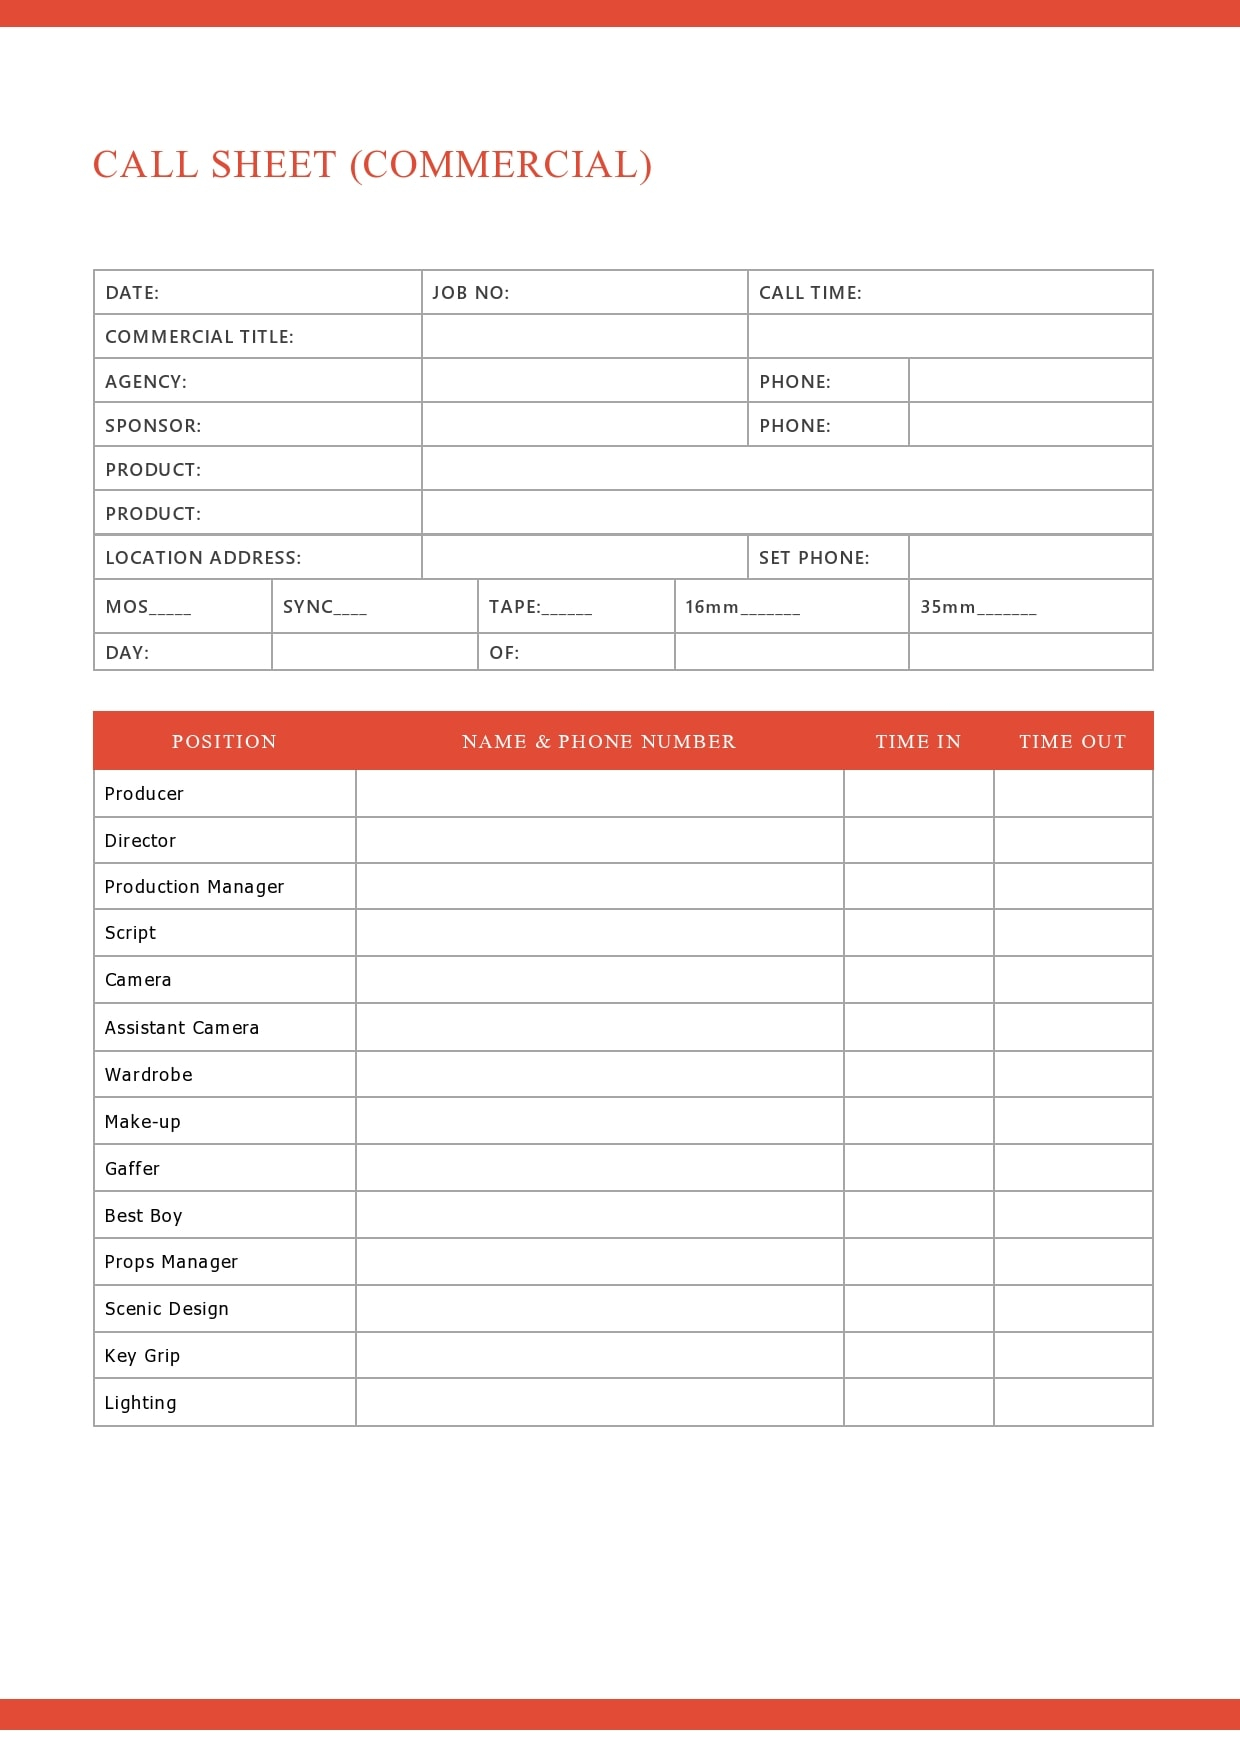 10 Simple Call Sheet Templates (FREE) - TemplateArchive With Regard To Blank Call Sheet Template